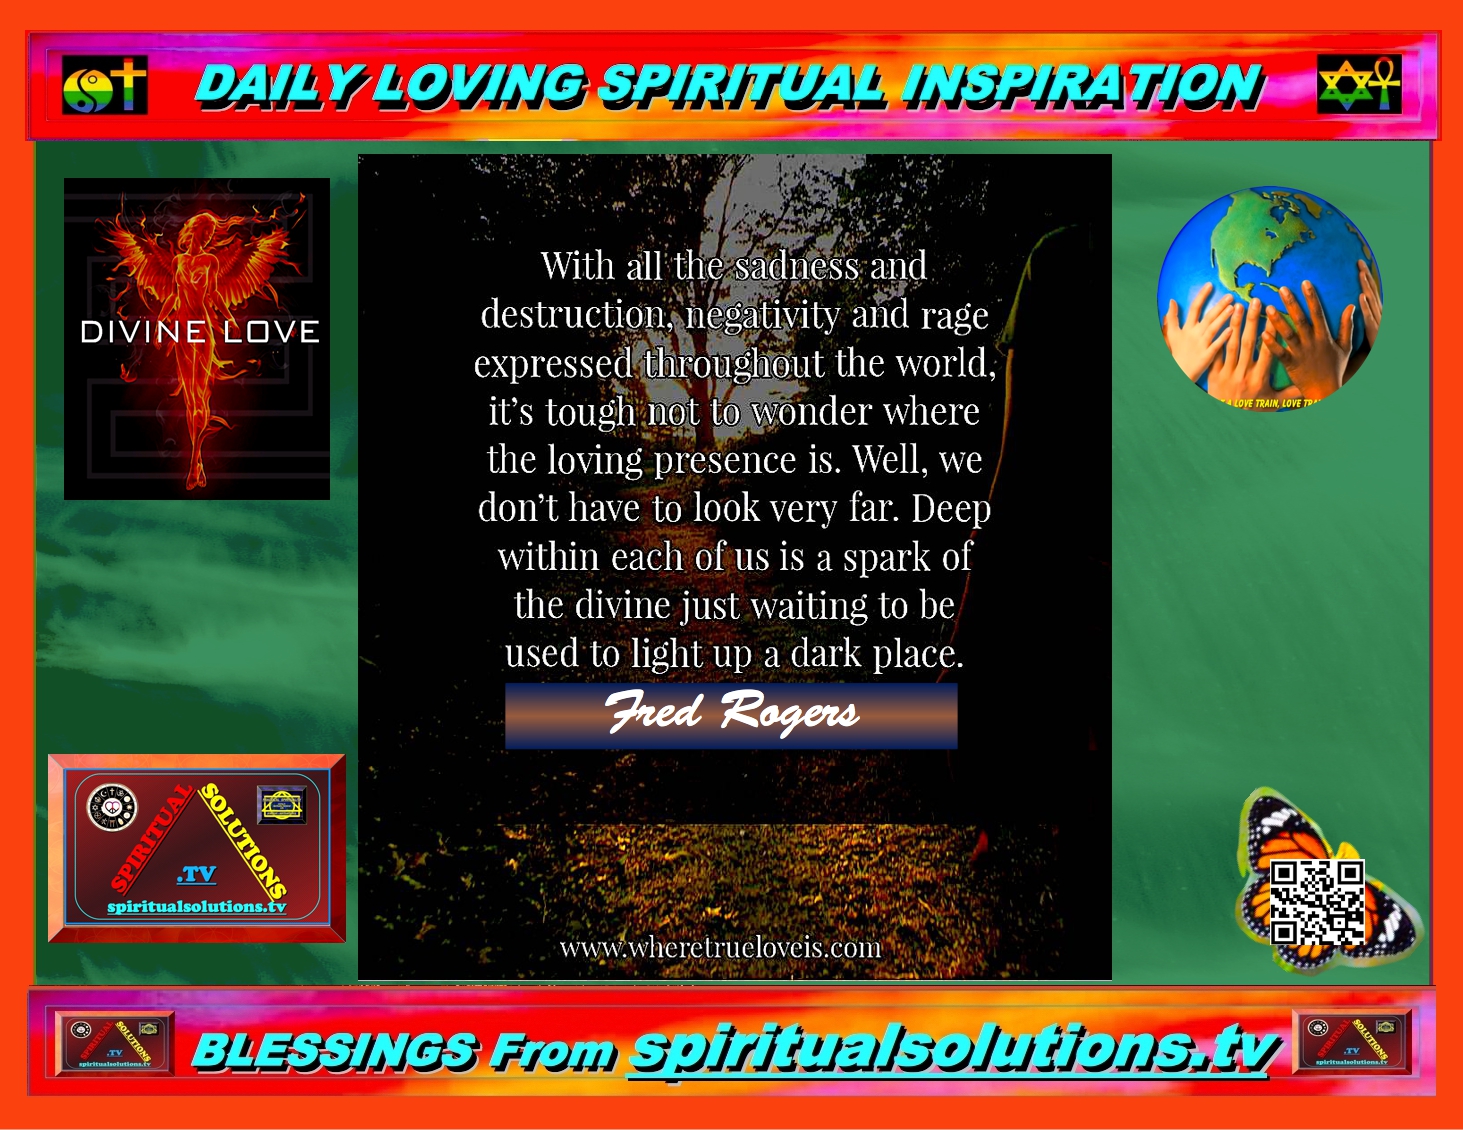 ==========================================DLSI-1-24-23-FRED-ROGERS-DIVINE-WITHIN========================================================================DLSI-1-24-23-FRED-ROGERS-DIVINE-WITHIN===